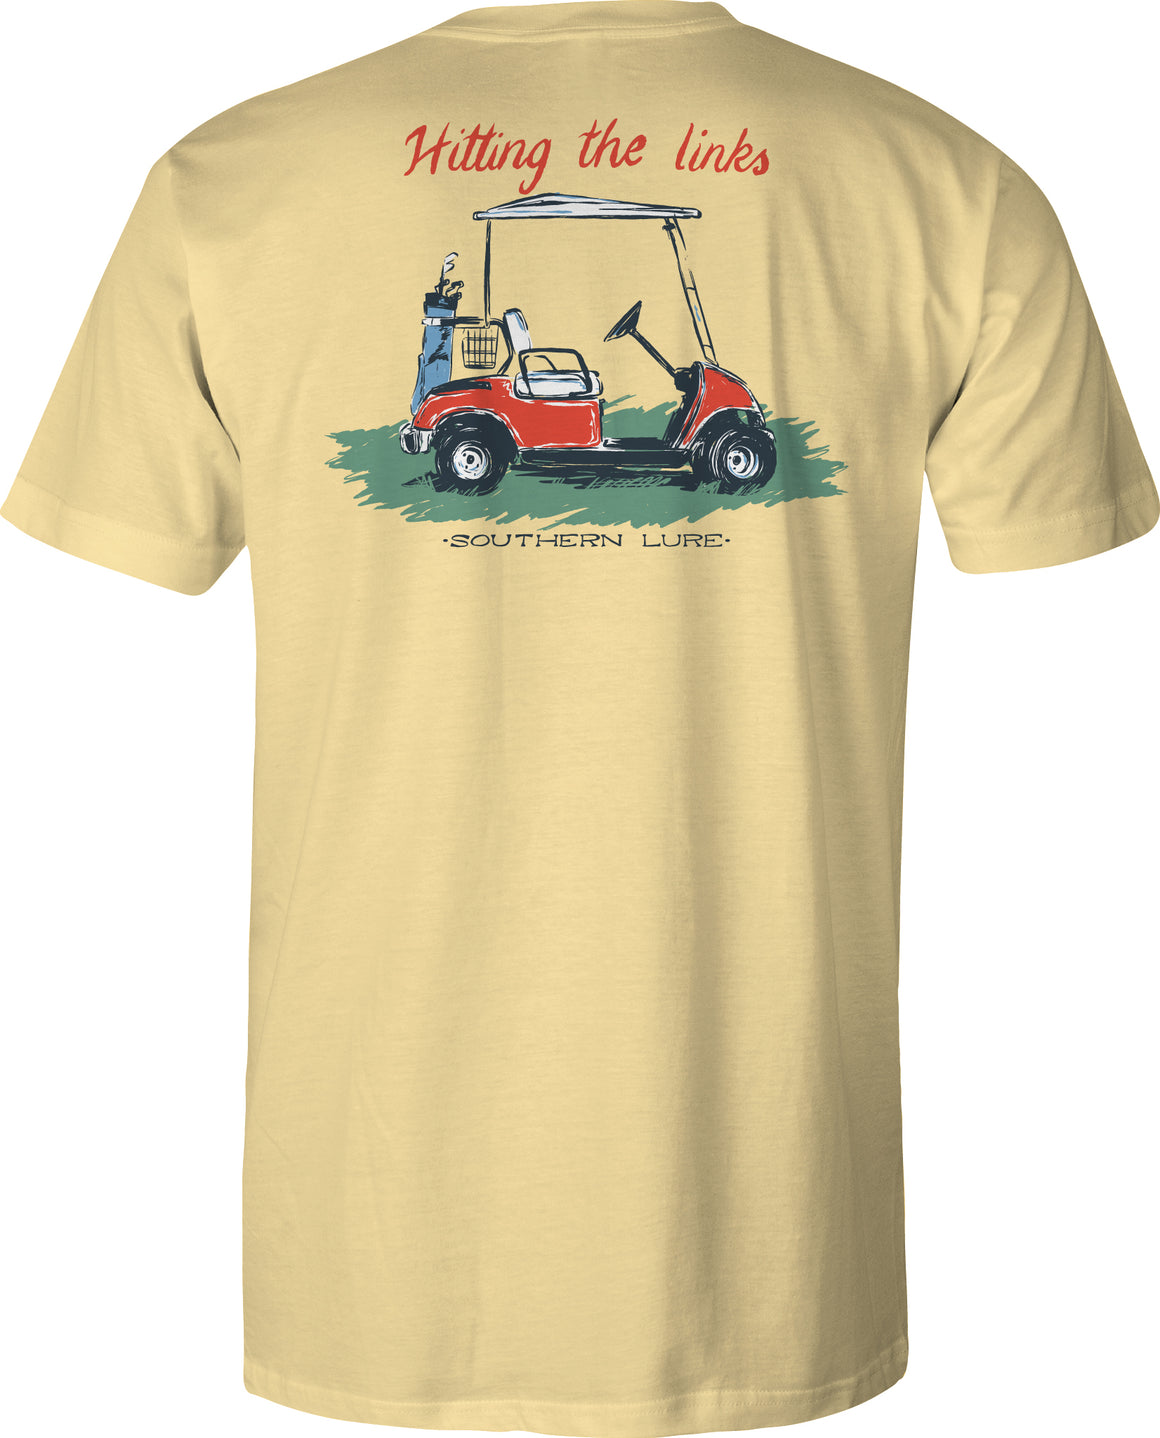 Youth & Toddler Short Sleeve Tee Hitting the Links - Yellow